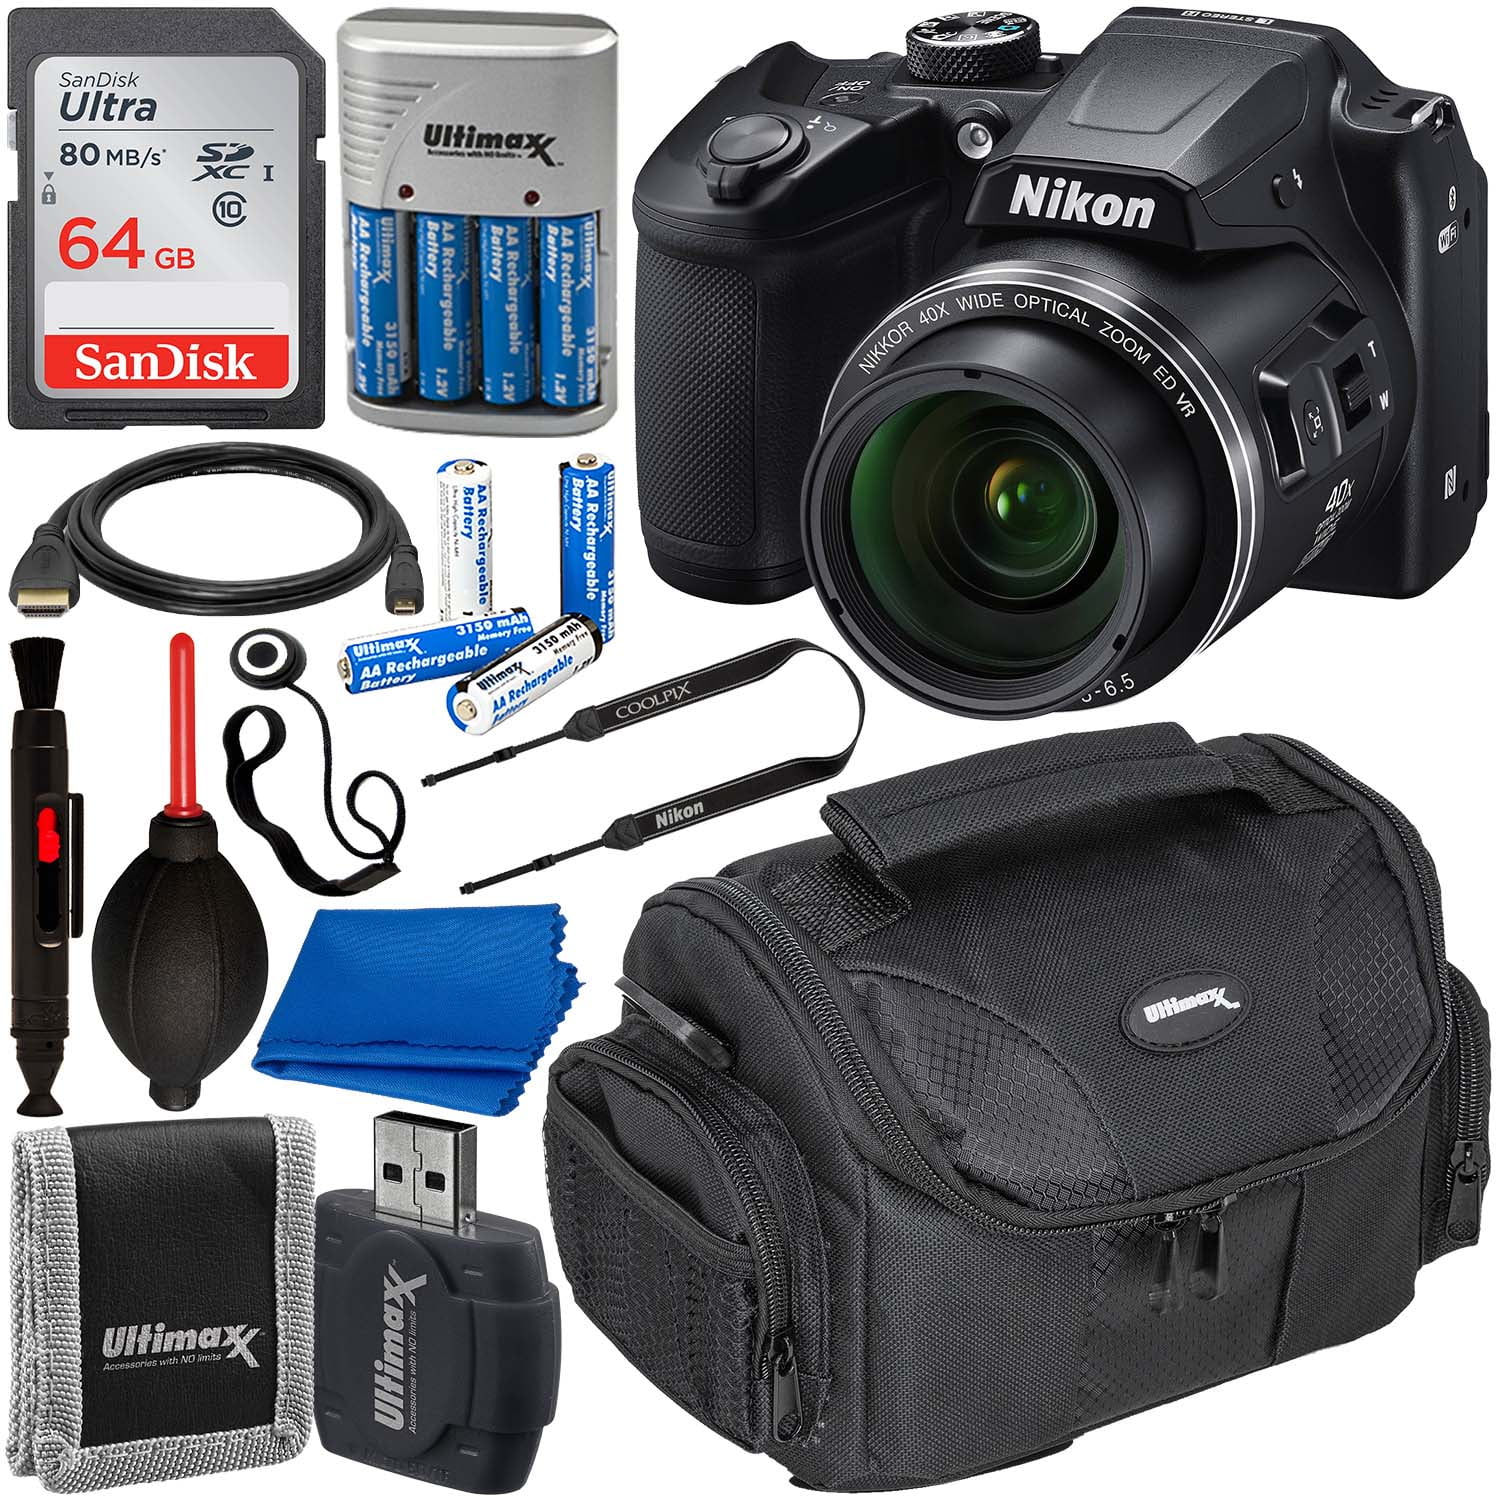 Nikon COOLPIX B500 Digital Camera (Black) with Starter Bundle – Includes: SanDisk Ultra 64GB SDXC Memory Card, Rechargeable Batteries with Dock Charger, Protective Case & MORE - Walmart.com